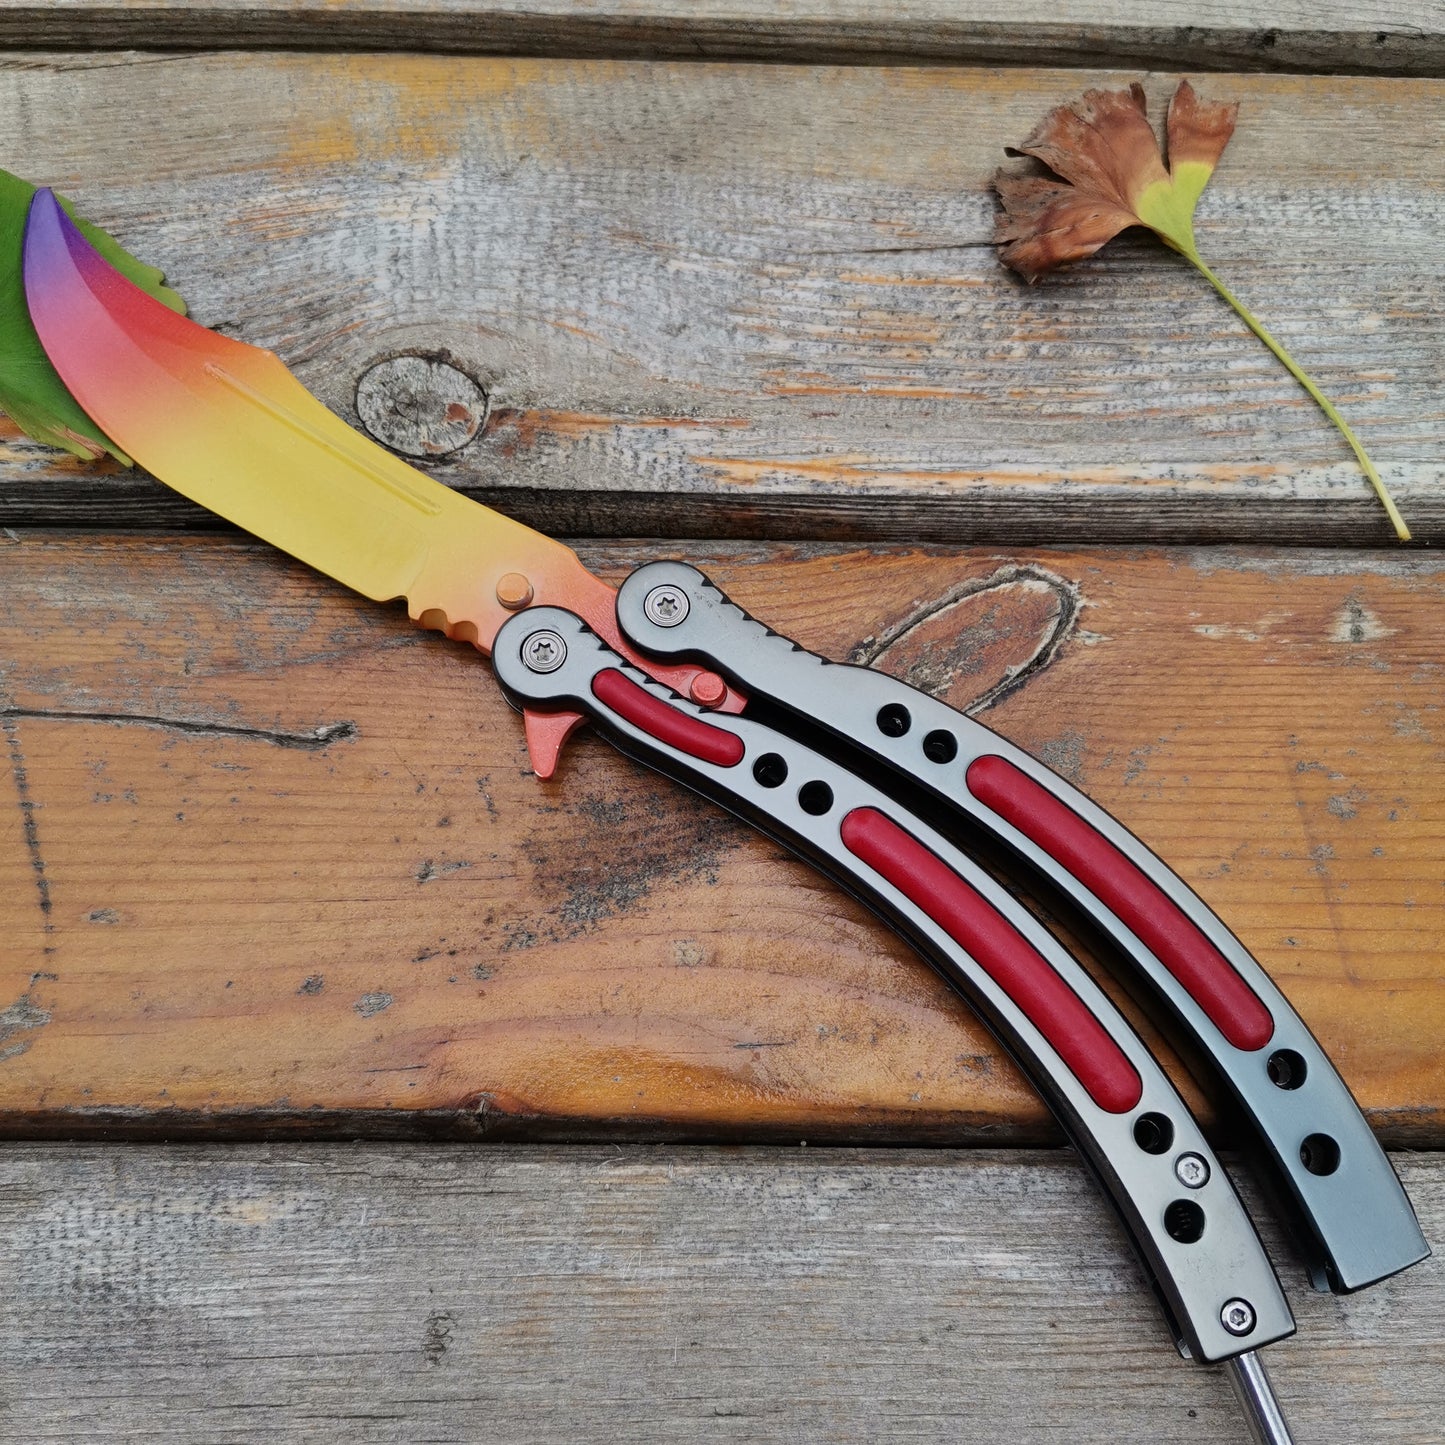 Global Offensive Game Butterfly Knife Trainer Replica